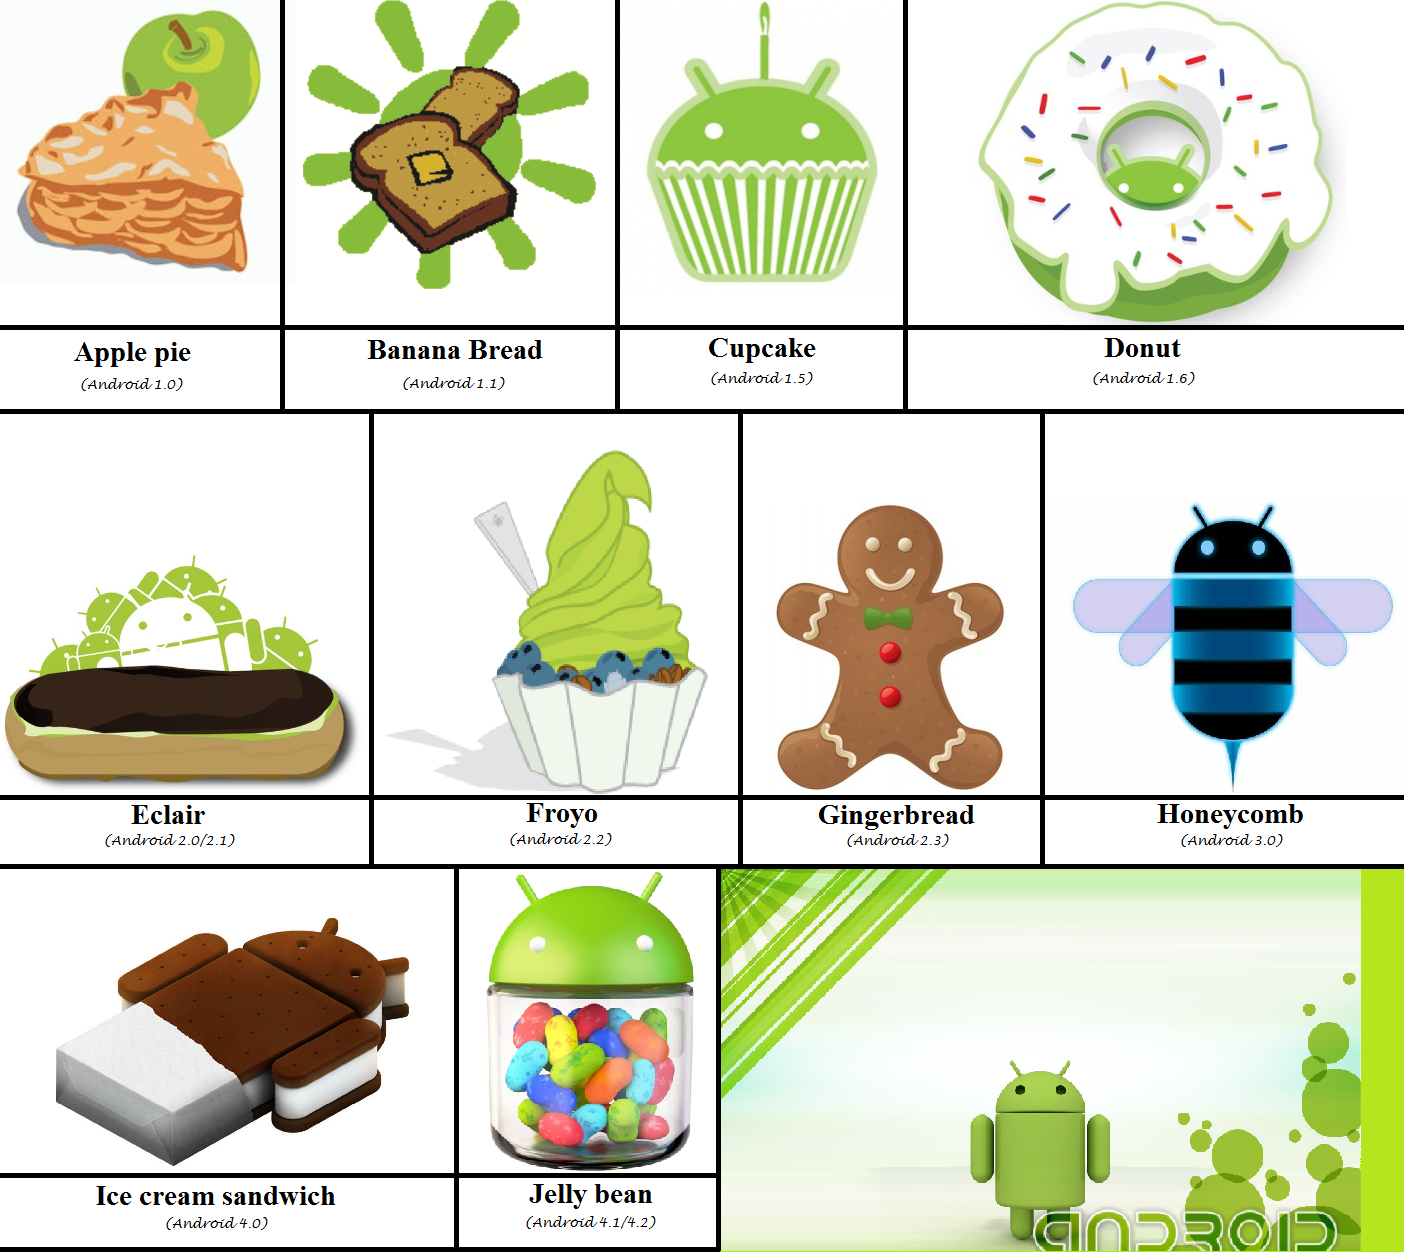 Том андроид 1 андроид. Андроид 1.0. Android 1.0 Apple pie. Android 1.1. Android Cupcake телефоны.